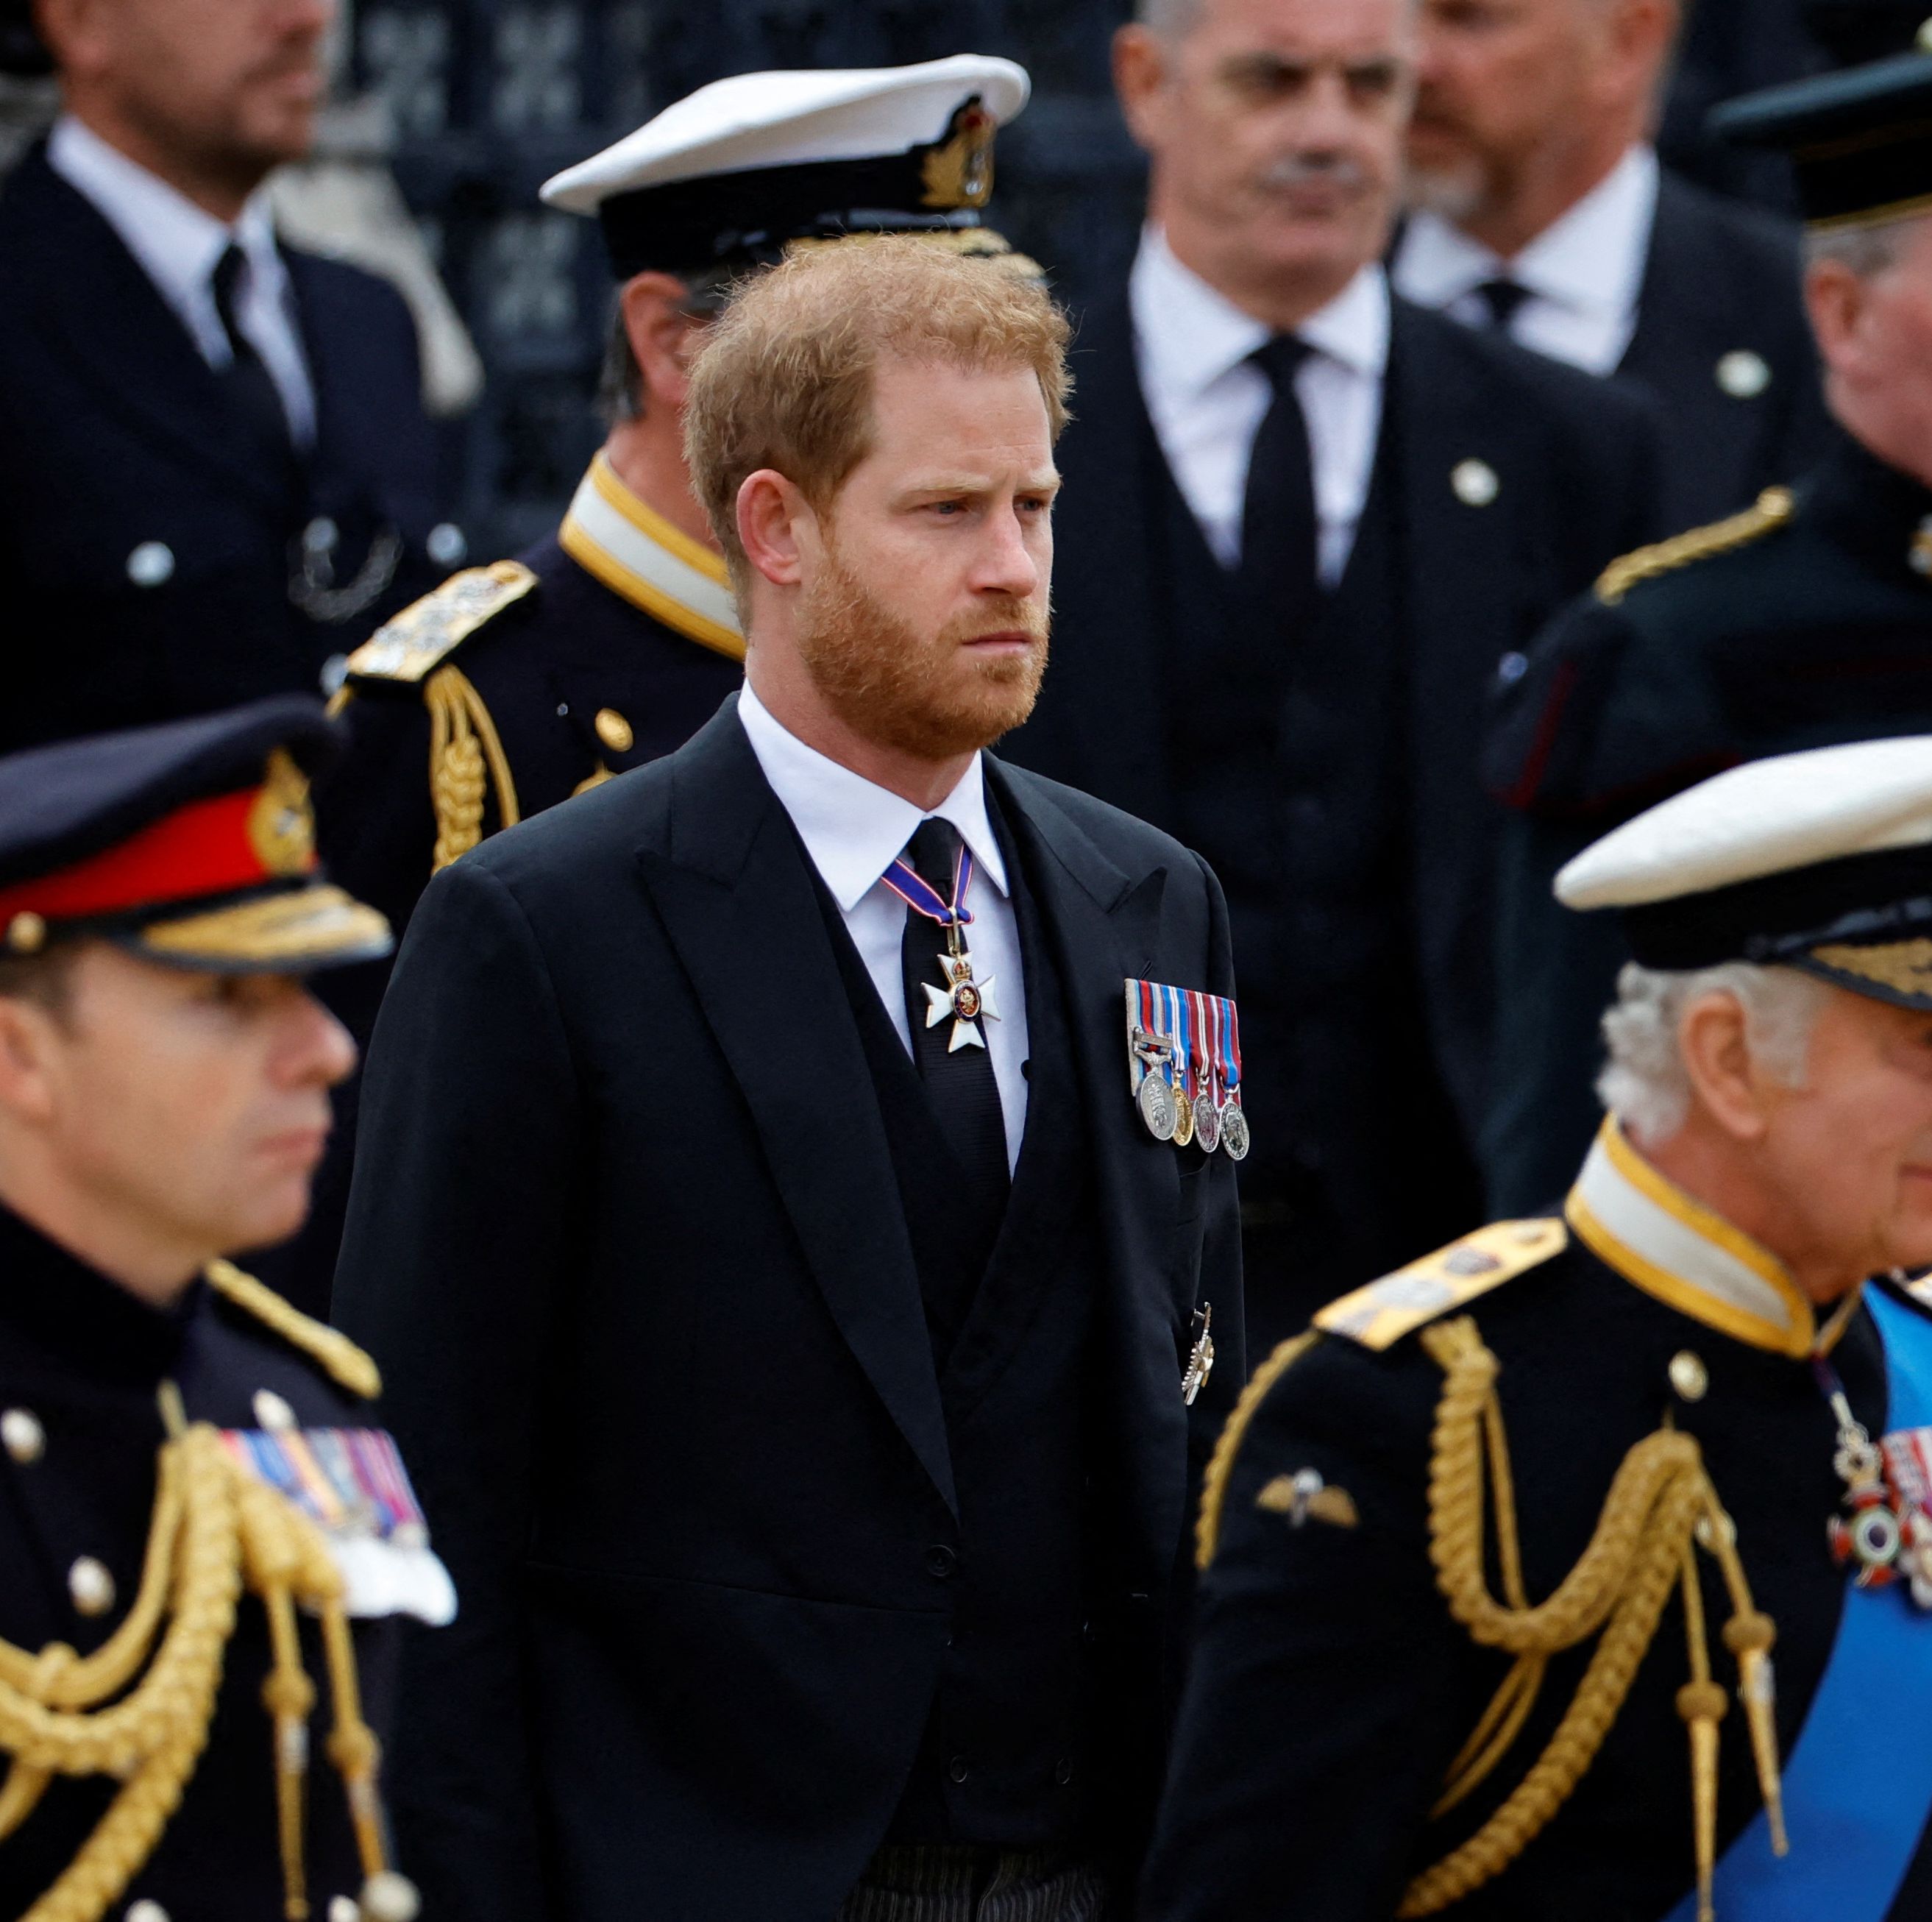 Prince Harry Was Only Told of the Queen's Death Five Minutes Before the Public